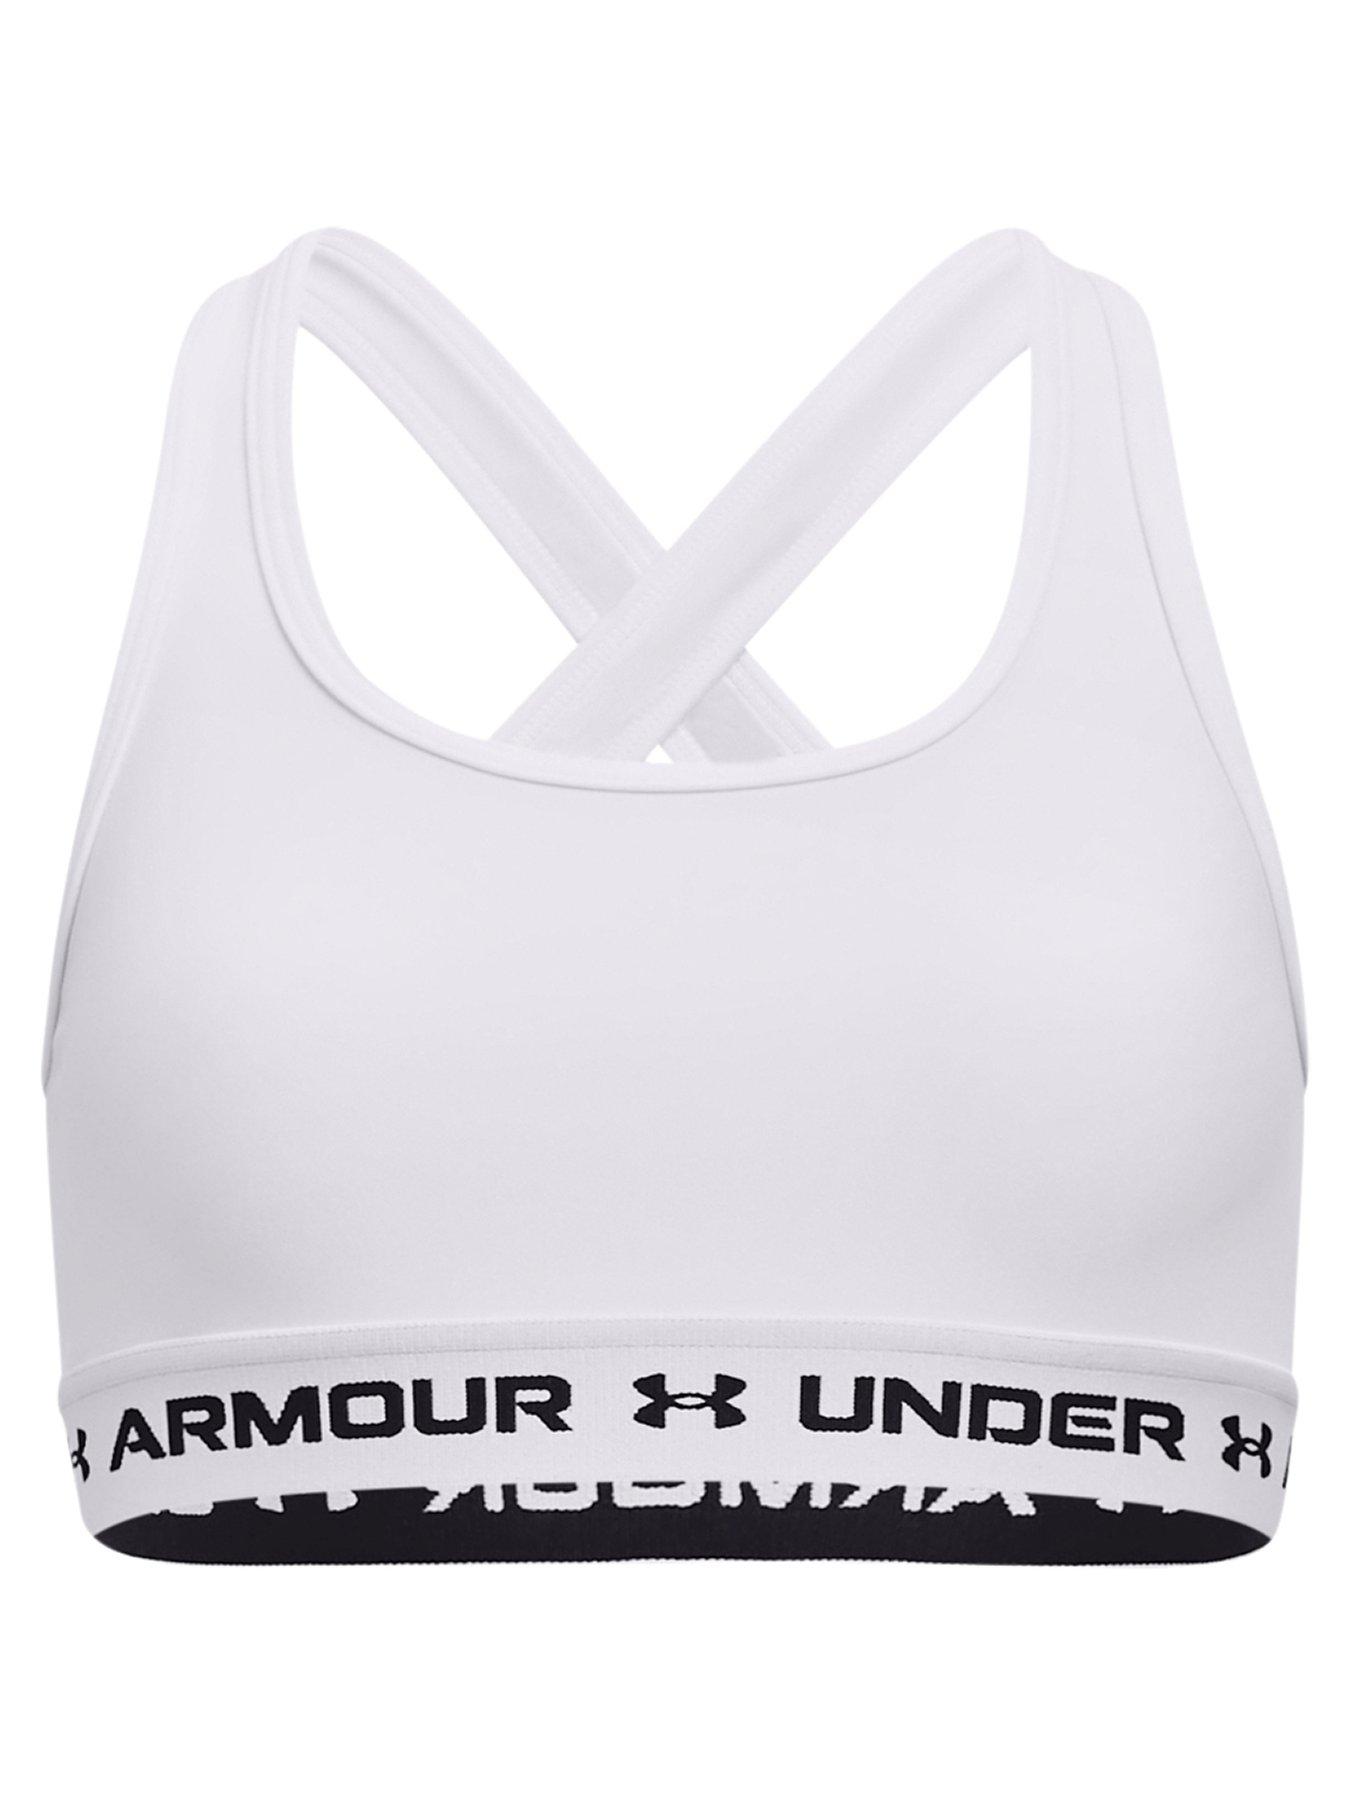 Under Armour ColdGear Sports Bra, Fitted, Lined, Unpadded, Racerback Straps